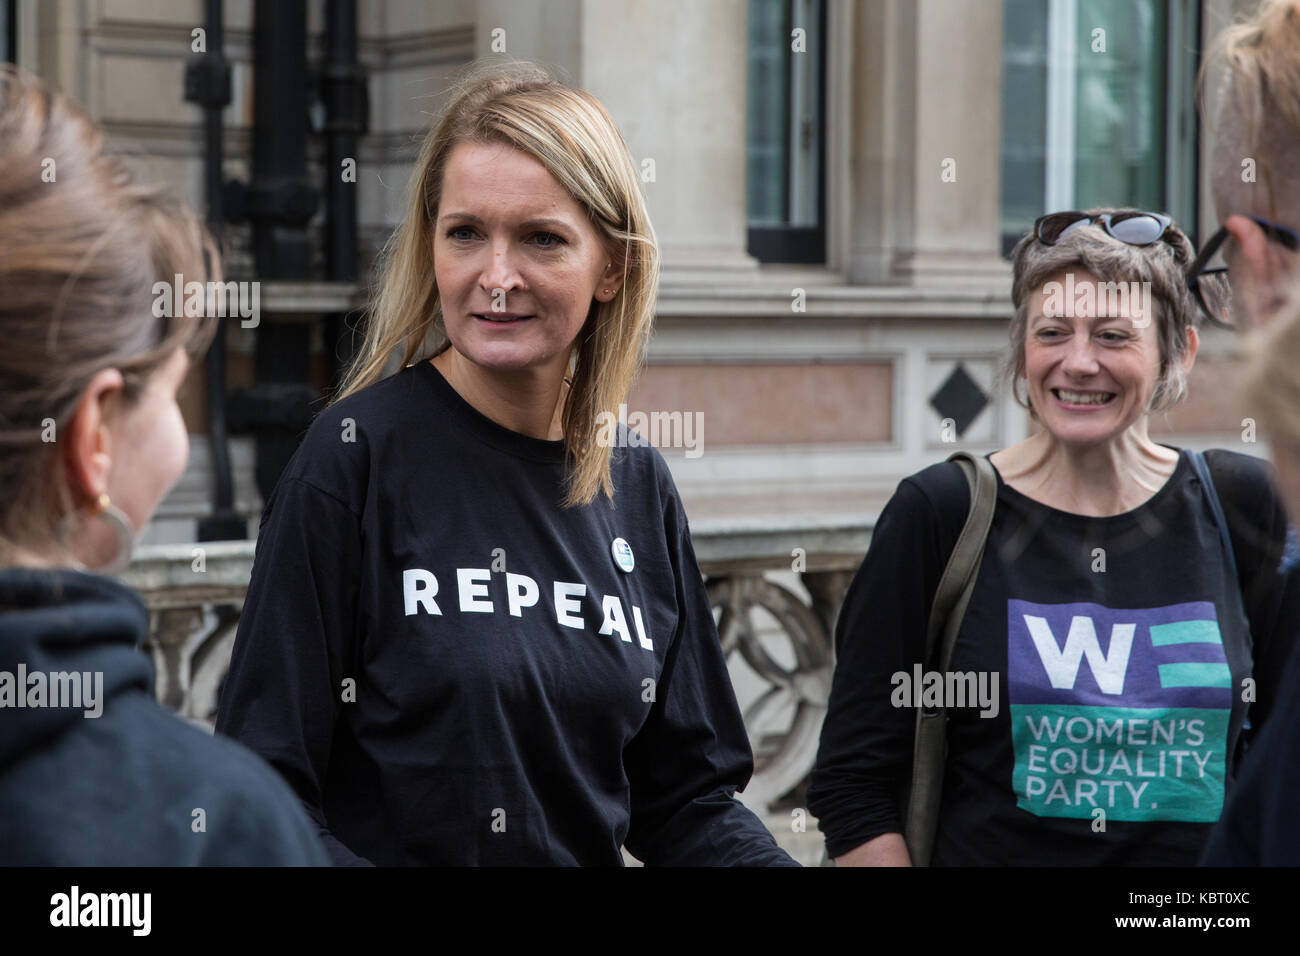 London, UK. 30th September, 2017. Sophie Walker, Leader of the Women's Equality Party, joins campaigners from the London-Irish Abortion Rights Campaign rallying outside the Irish Embassy in solidarity with the 205,704 Irish and Northern Irish women who have travelled to Great Britain for an abortion since the 8th Amendment in 1983 and to demand legislative change in Ireland to guarantee choice. The event was also held in solidarity with the Abortion Rights Campaign's 6th Annual March for Choice in Dublin. Stock Photo